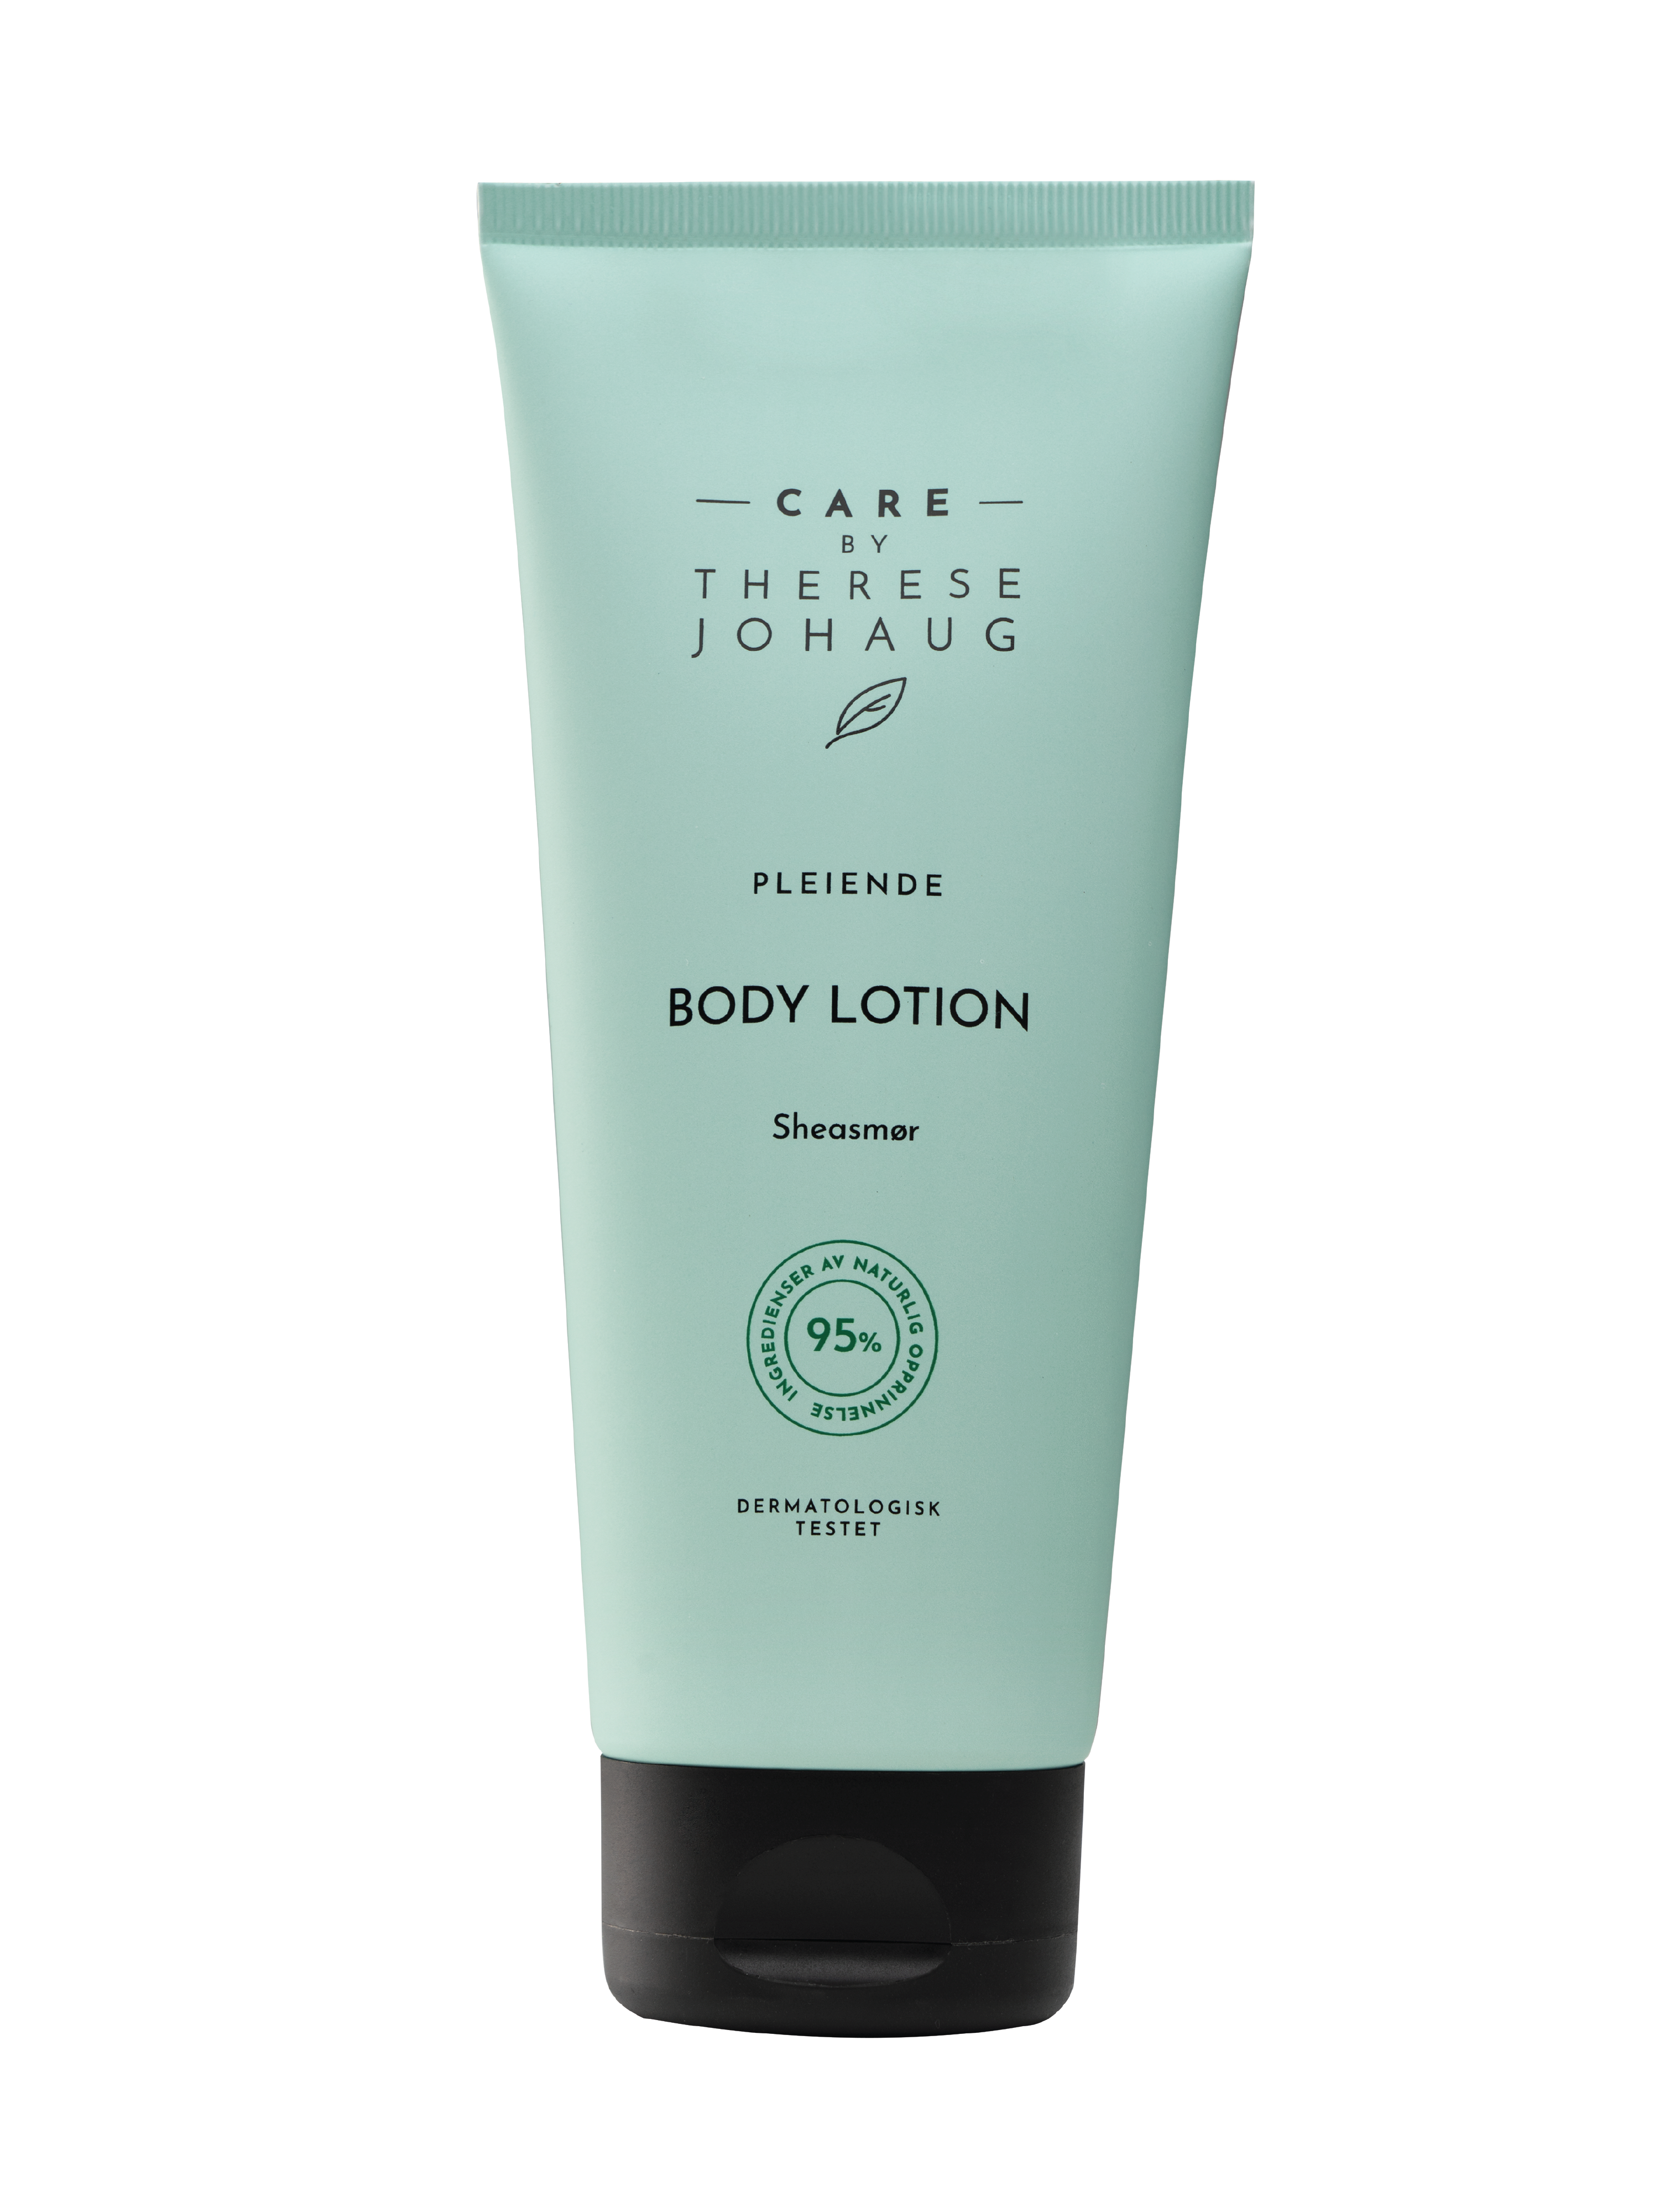 Care by Therese Johaug Body Lotion Sheasmør, 200 ml